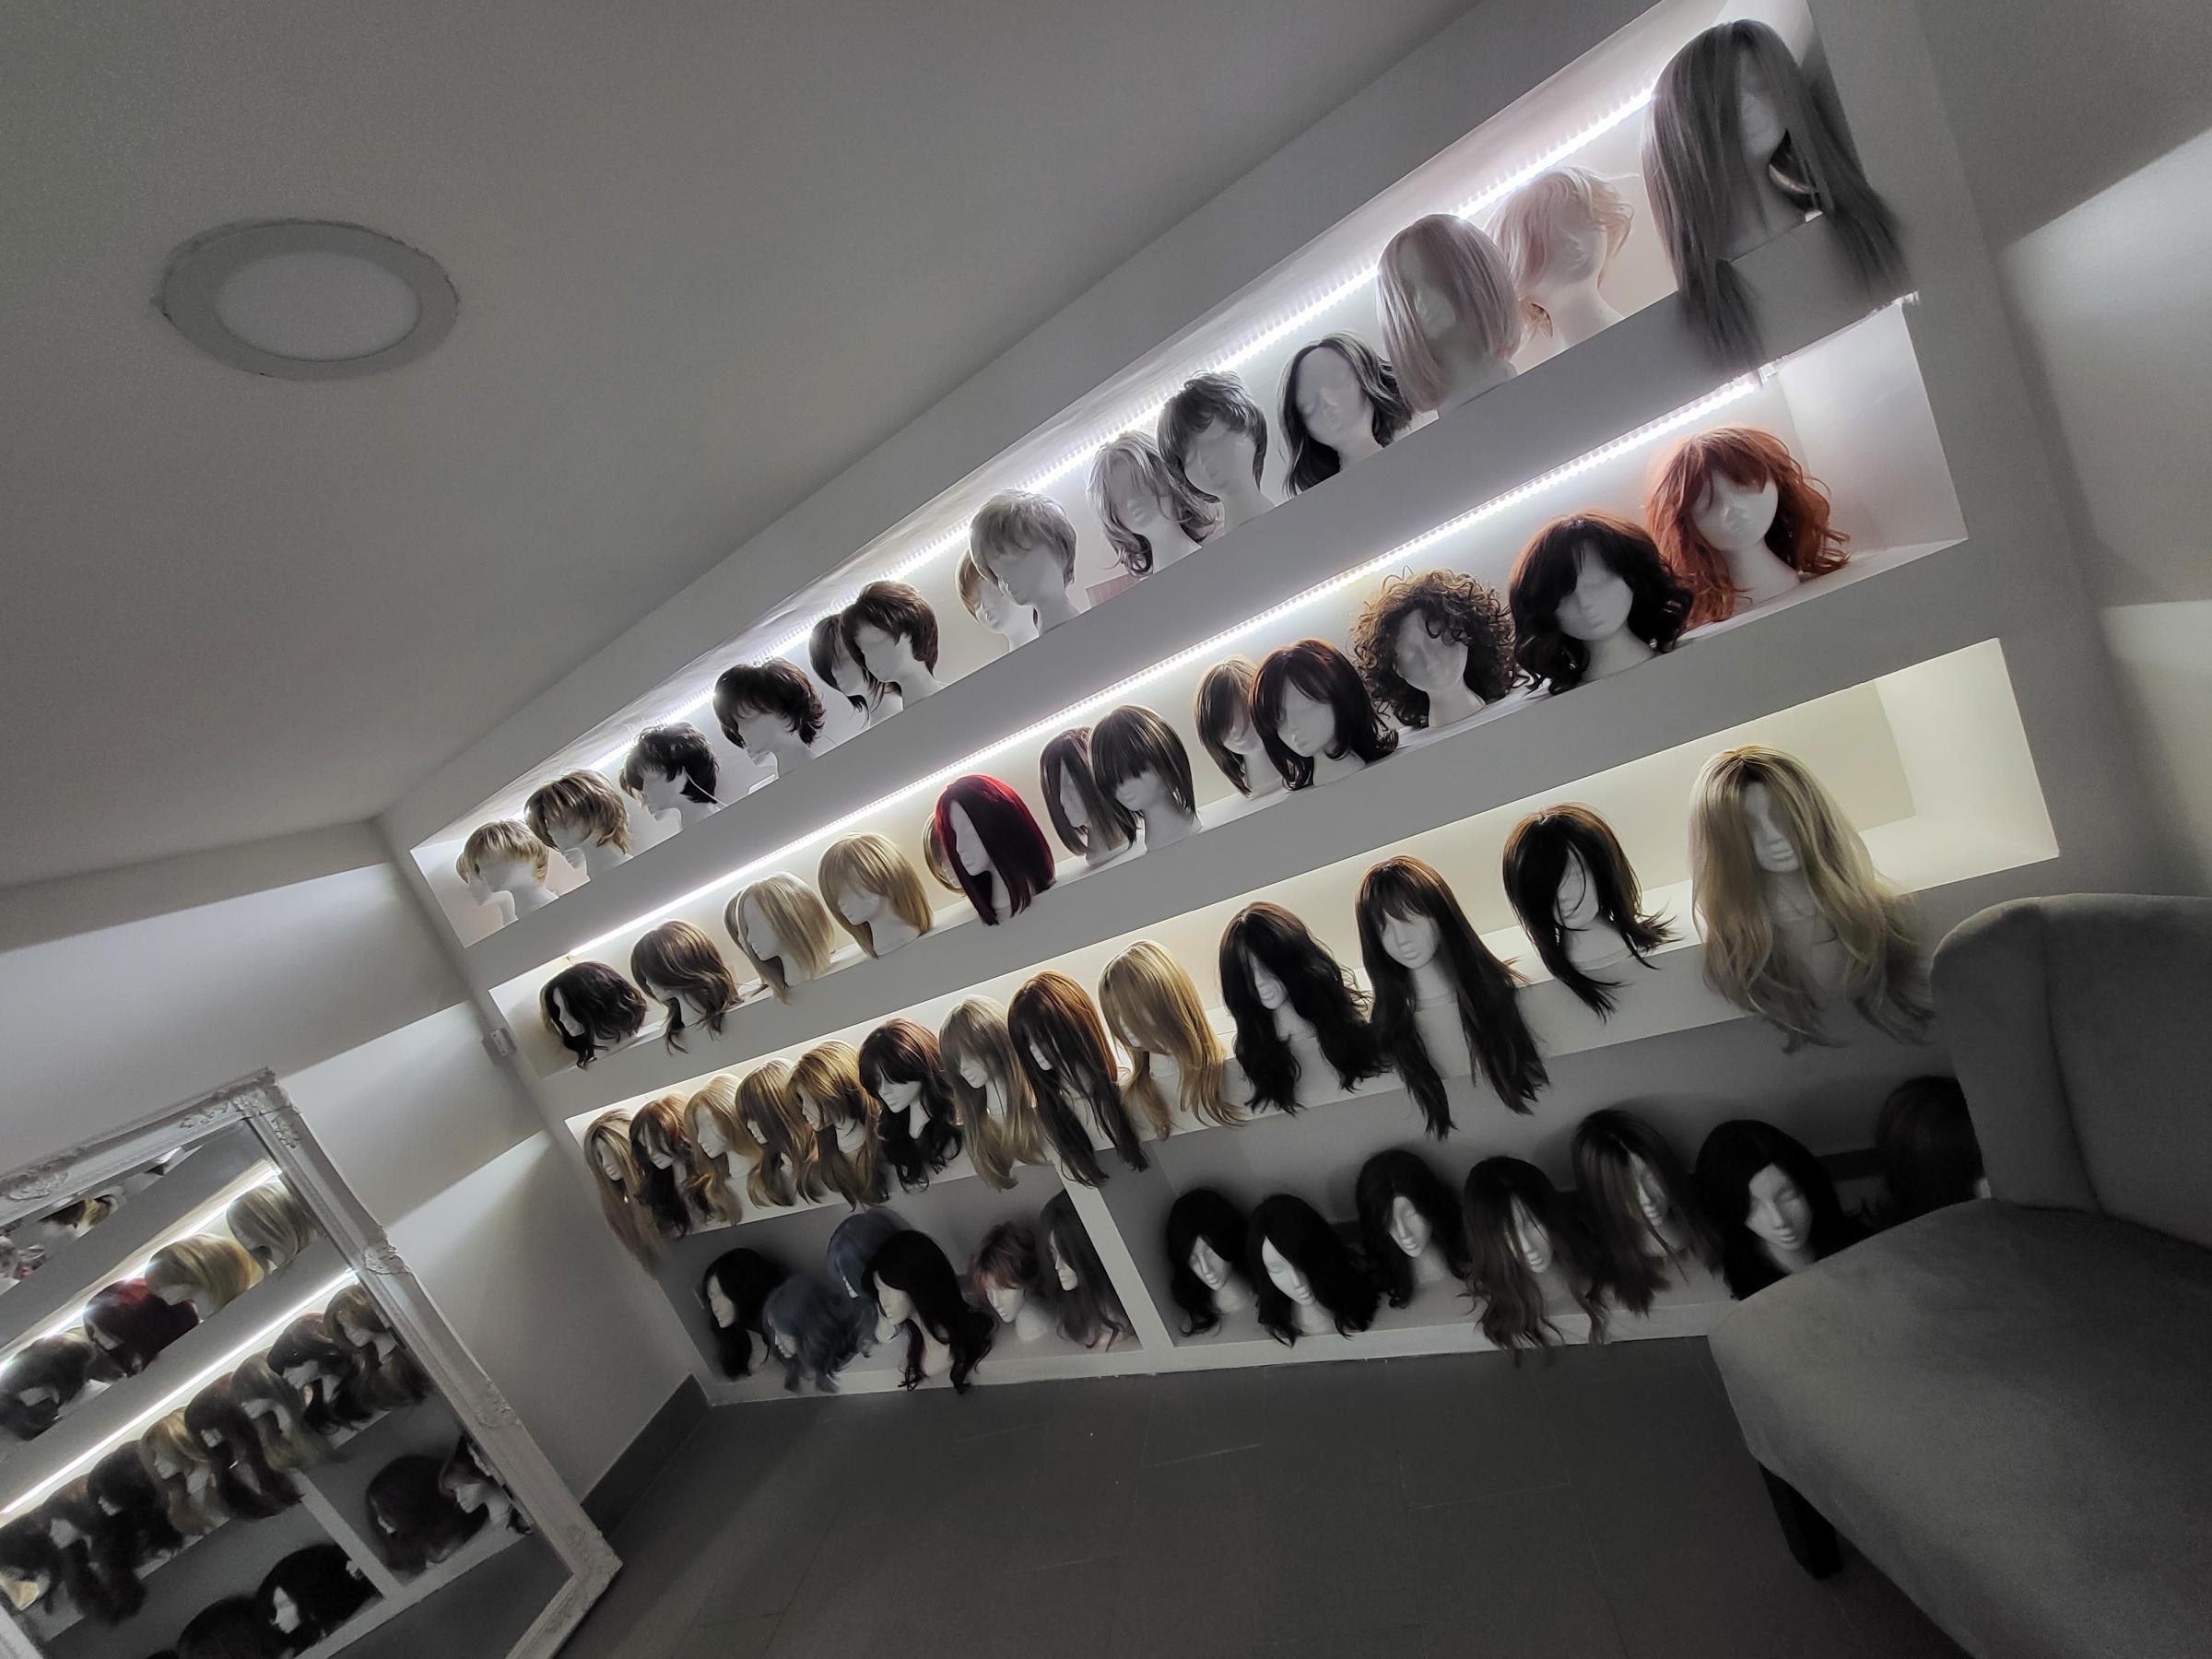 The Secret Halo specialises in wigs for customers suffering from hair loss